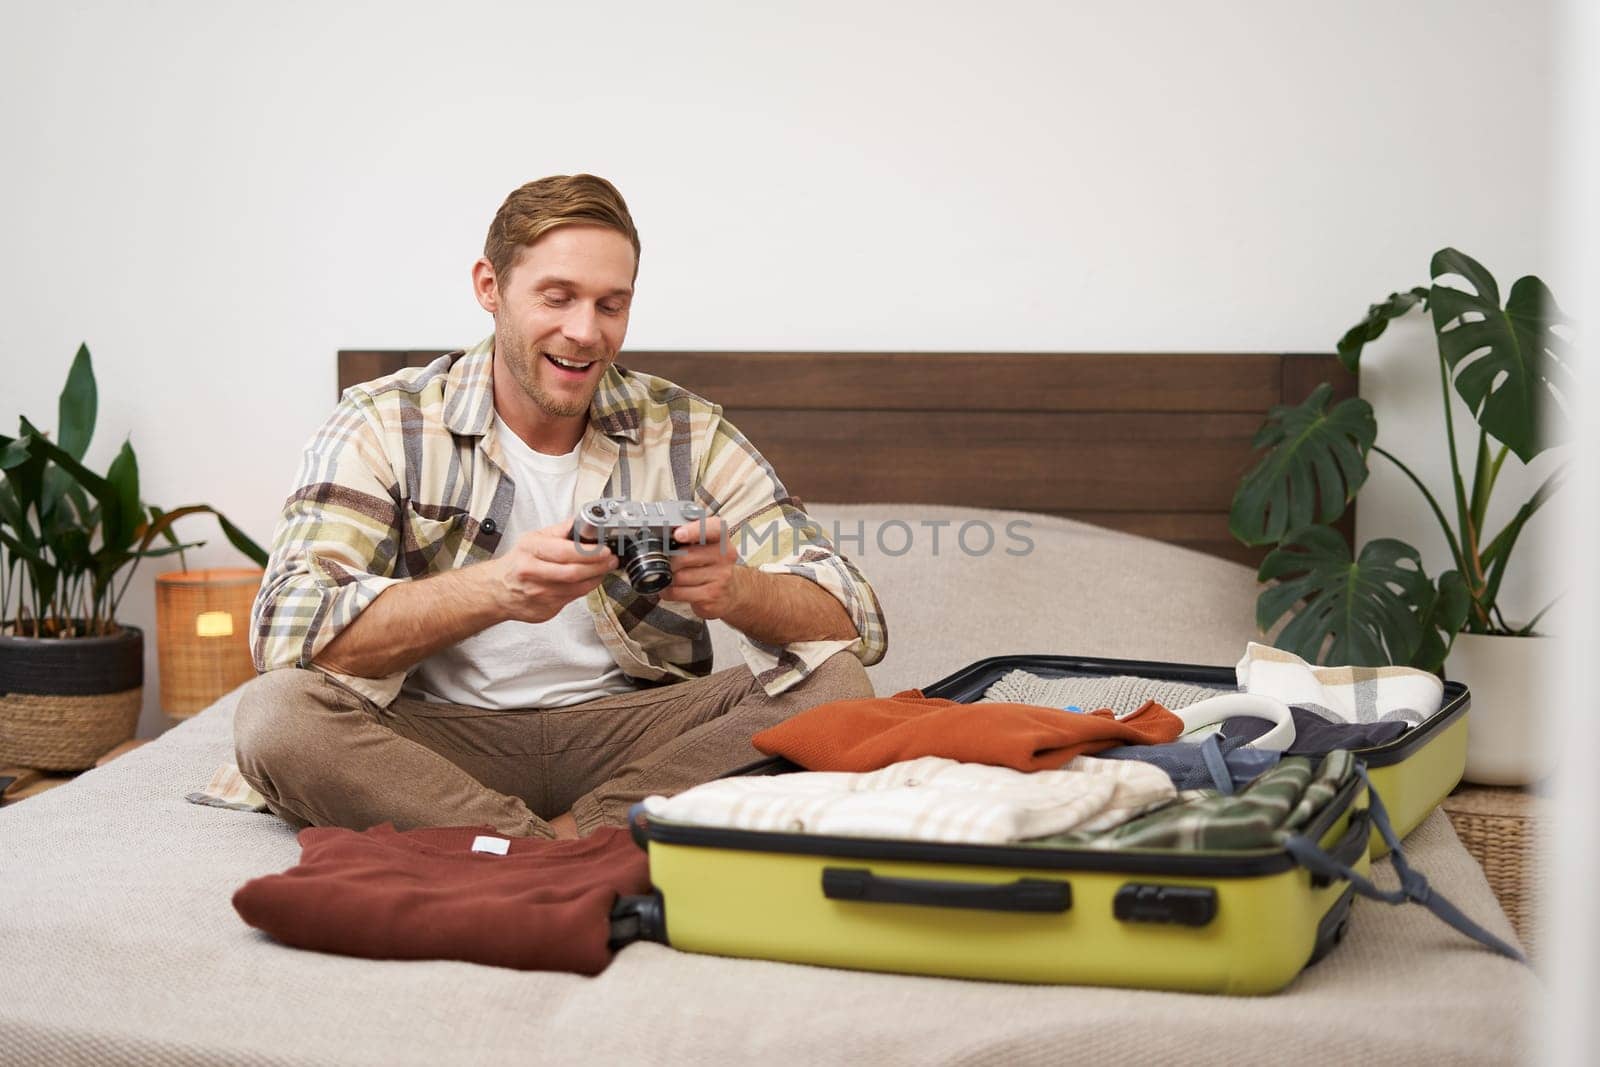 Portrait of handsome, happy young man, sitting with suitcase on bed, looking at his camera, laughing and smiling, watching photos or videos from holiday trip. Lifestyle concept